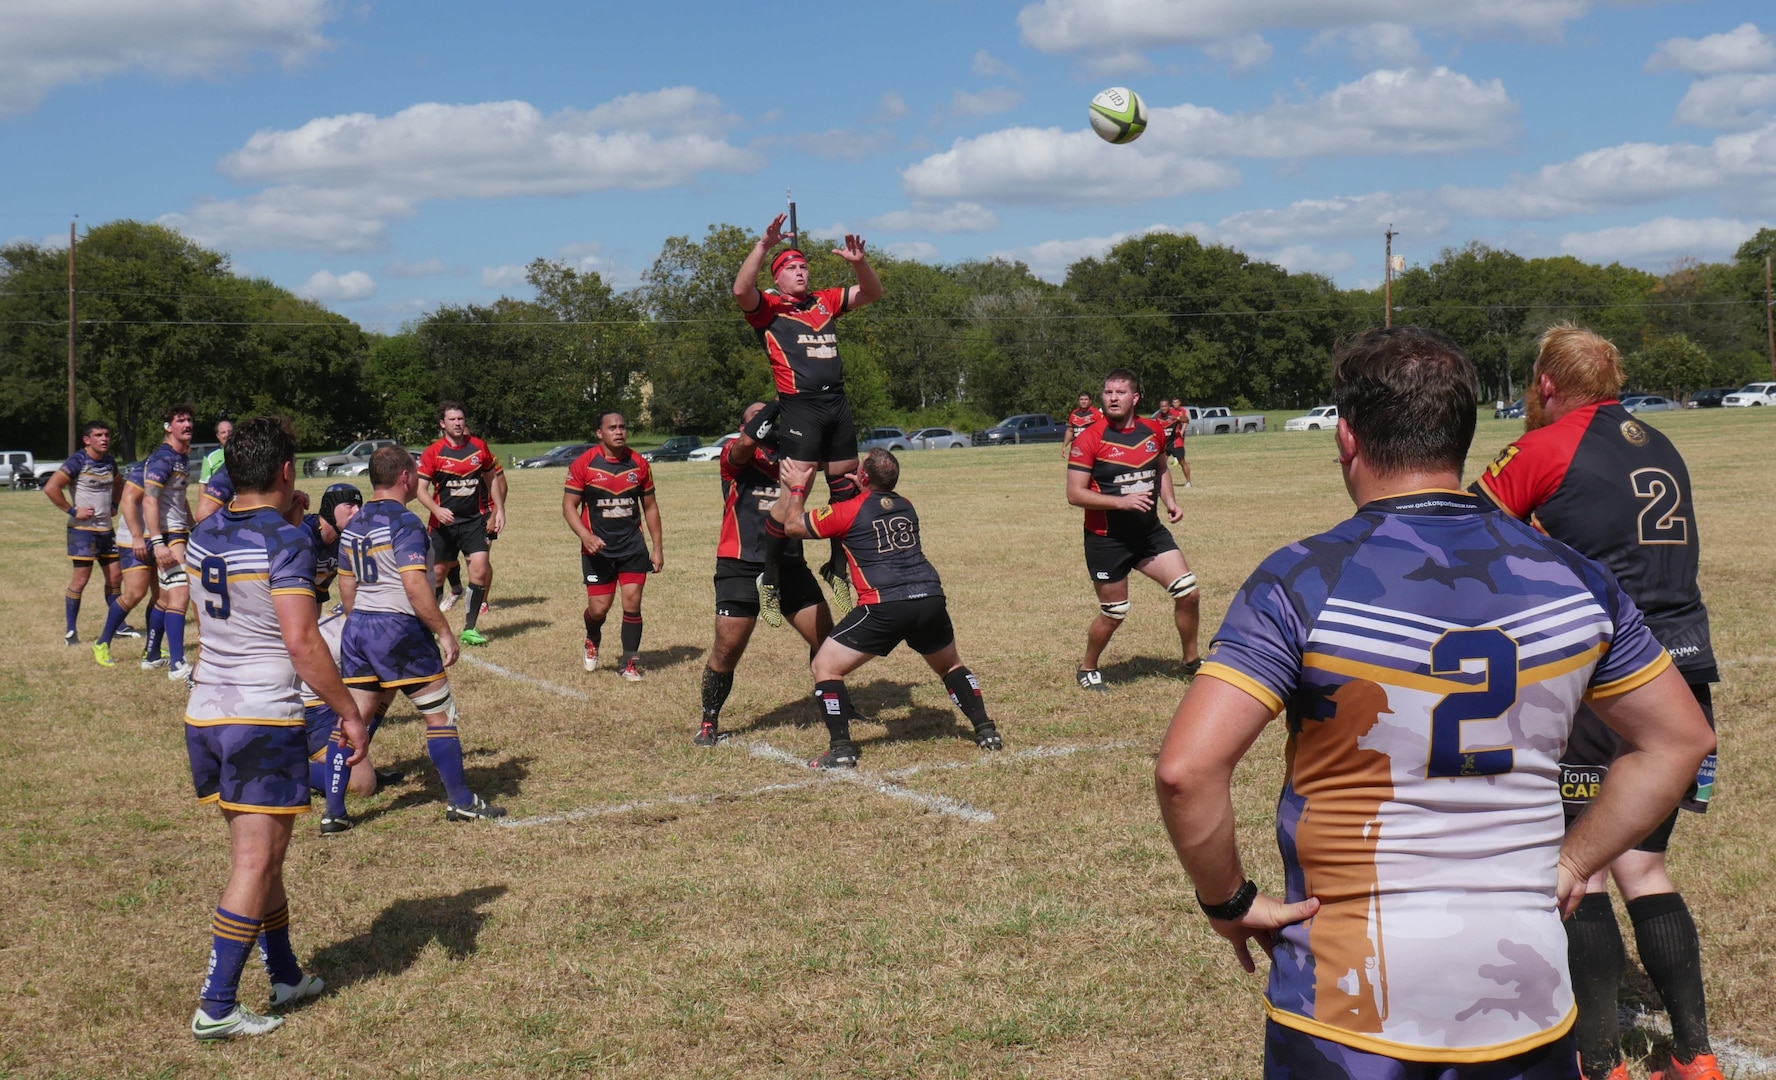 The San Antonio Rugby Football Club, a 45-year-old organization formed by doctors from Brooke Army Medical Center in 1971, execute a “lineout” to throw the ball back into play in their match against the British Army Medical Services Rugby Team at the Wheatley Sports complex in San Antonio Oct. 15. The visiting British team broke open a close match in the second half and won, 45-10. 